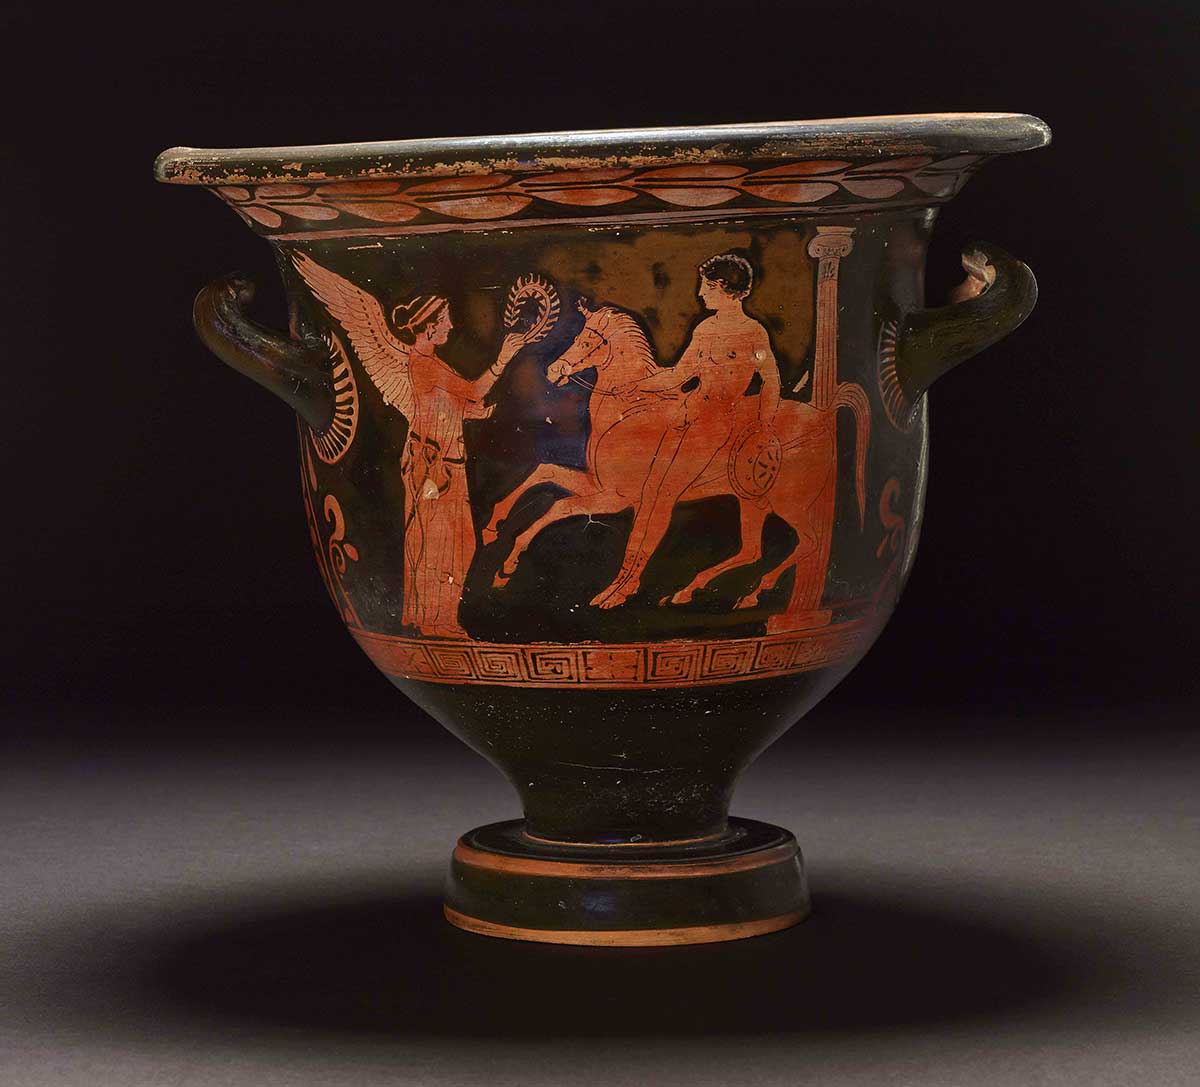 Red-figured ceramic vessel featuring a winged figure facing another figure on a horse. - click to view larger image